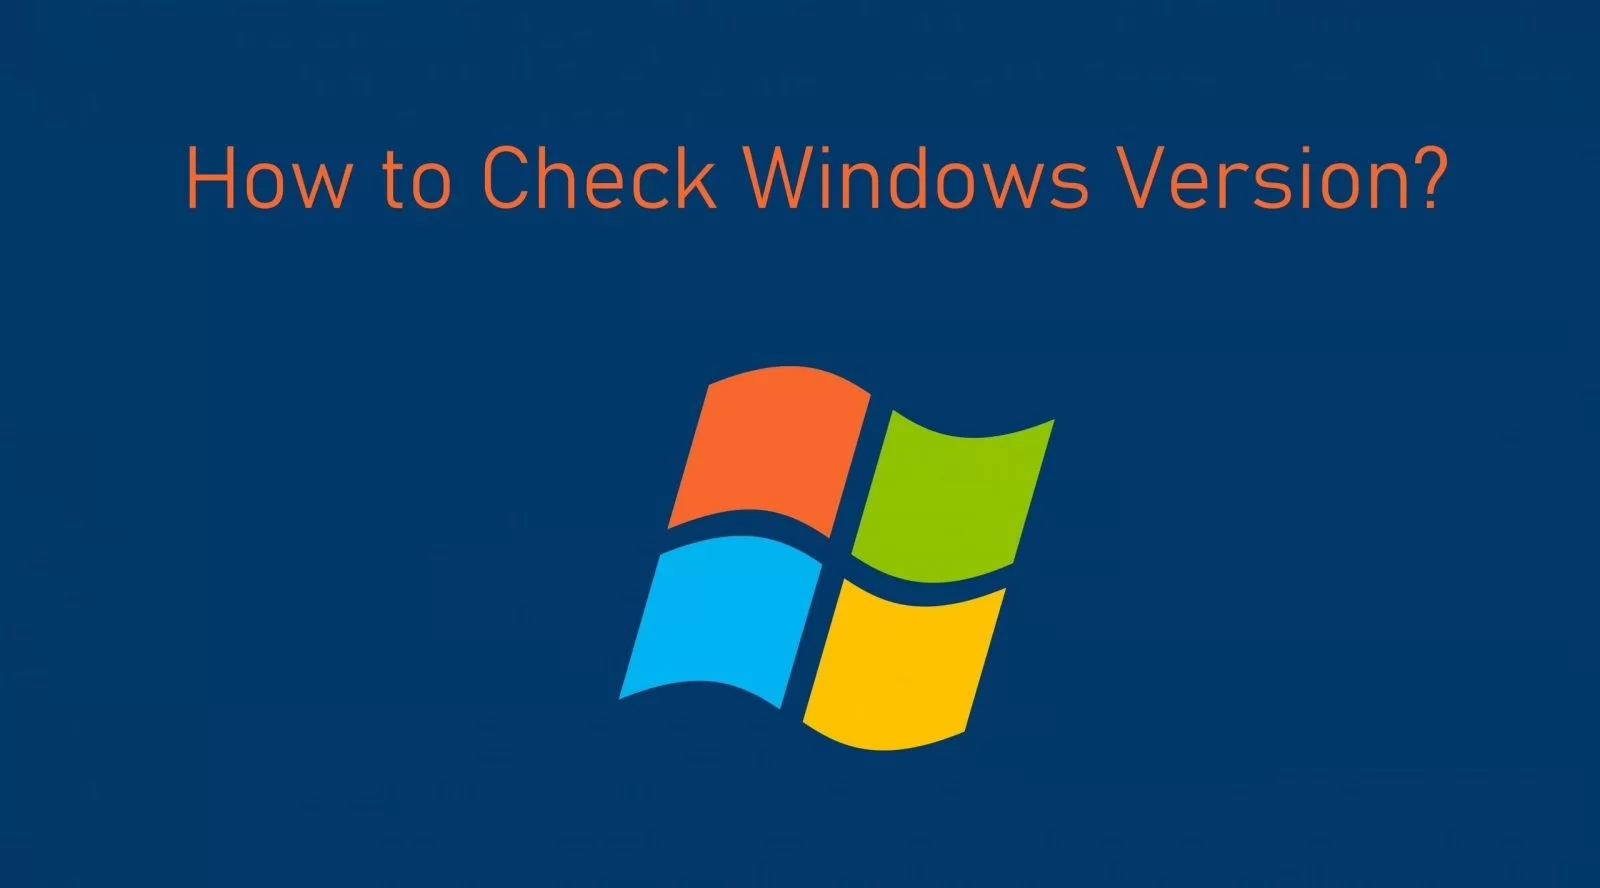 How to check Windows version?